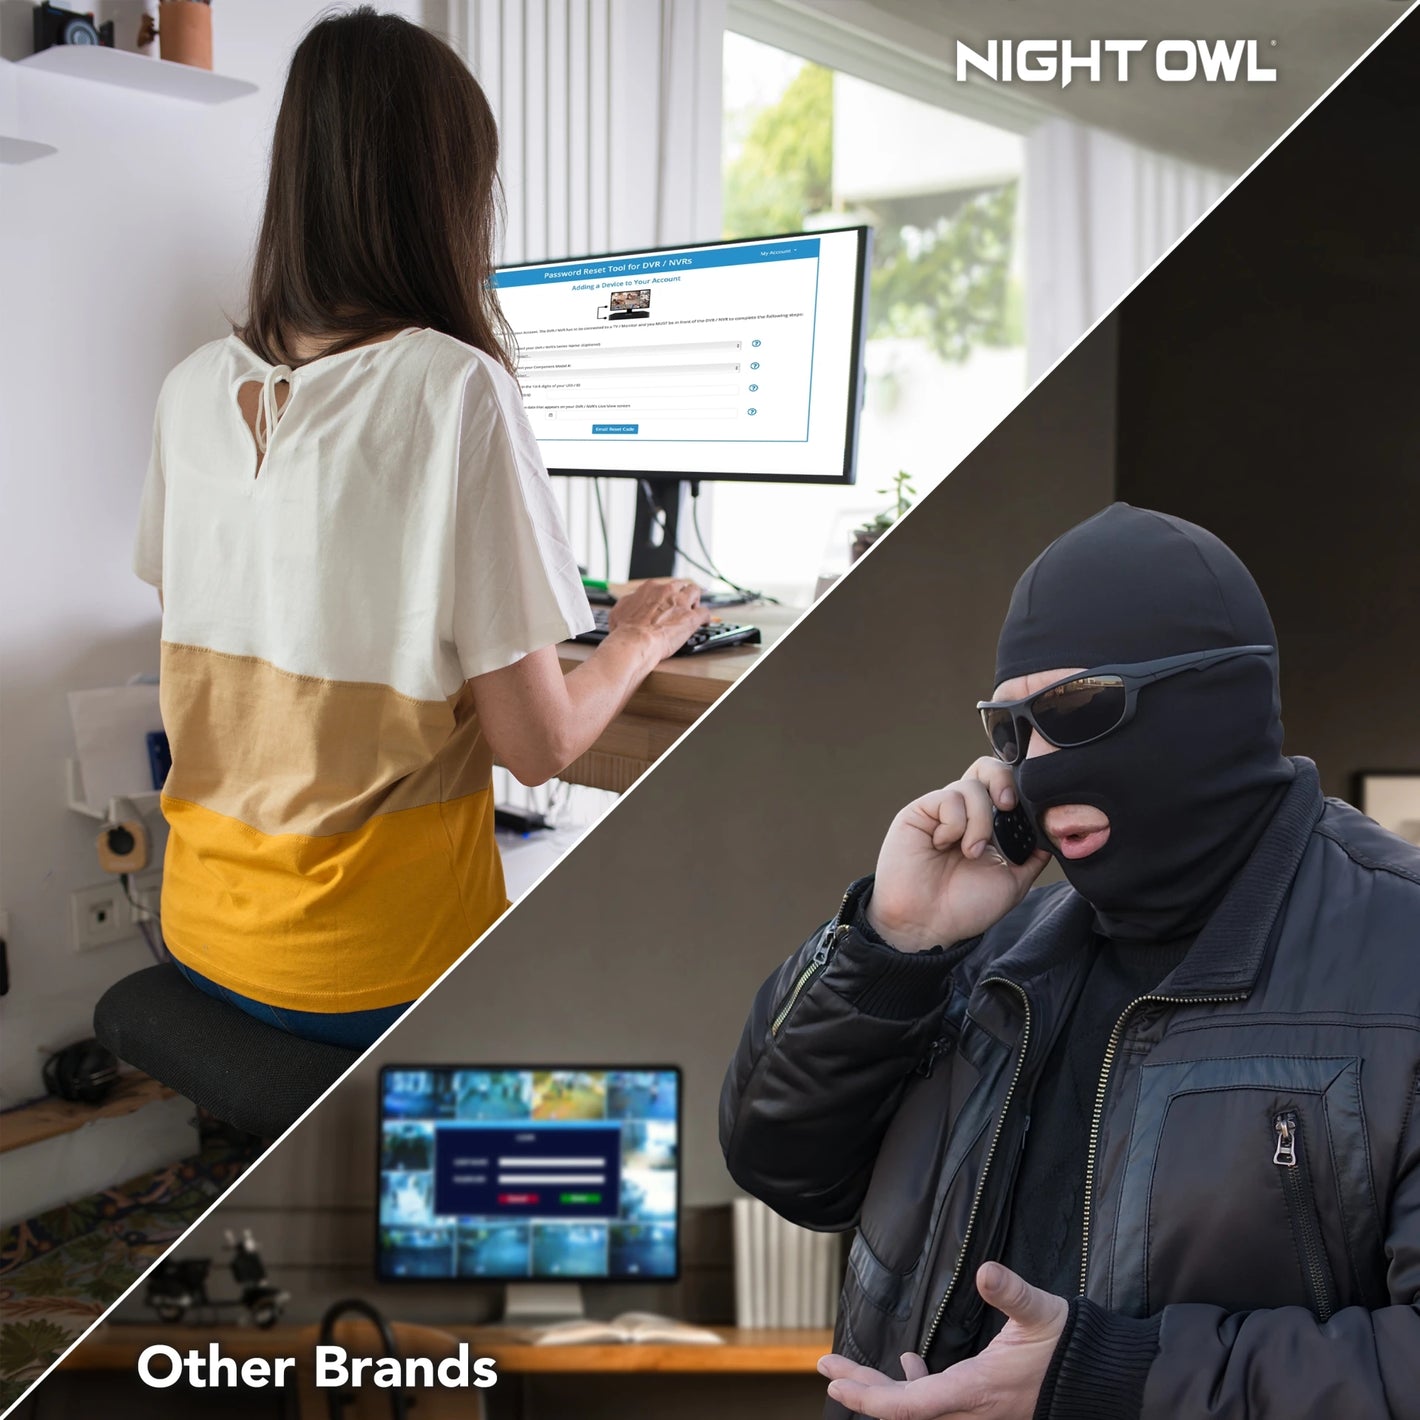 side by side comparison of night owl keeping your info safe vs other brands